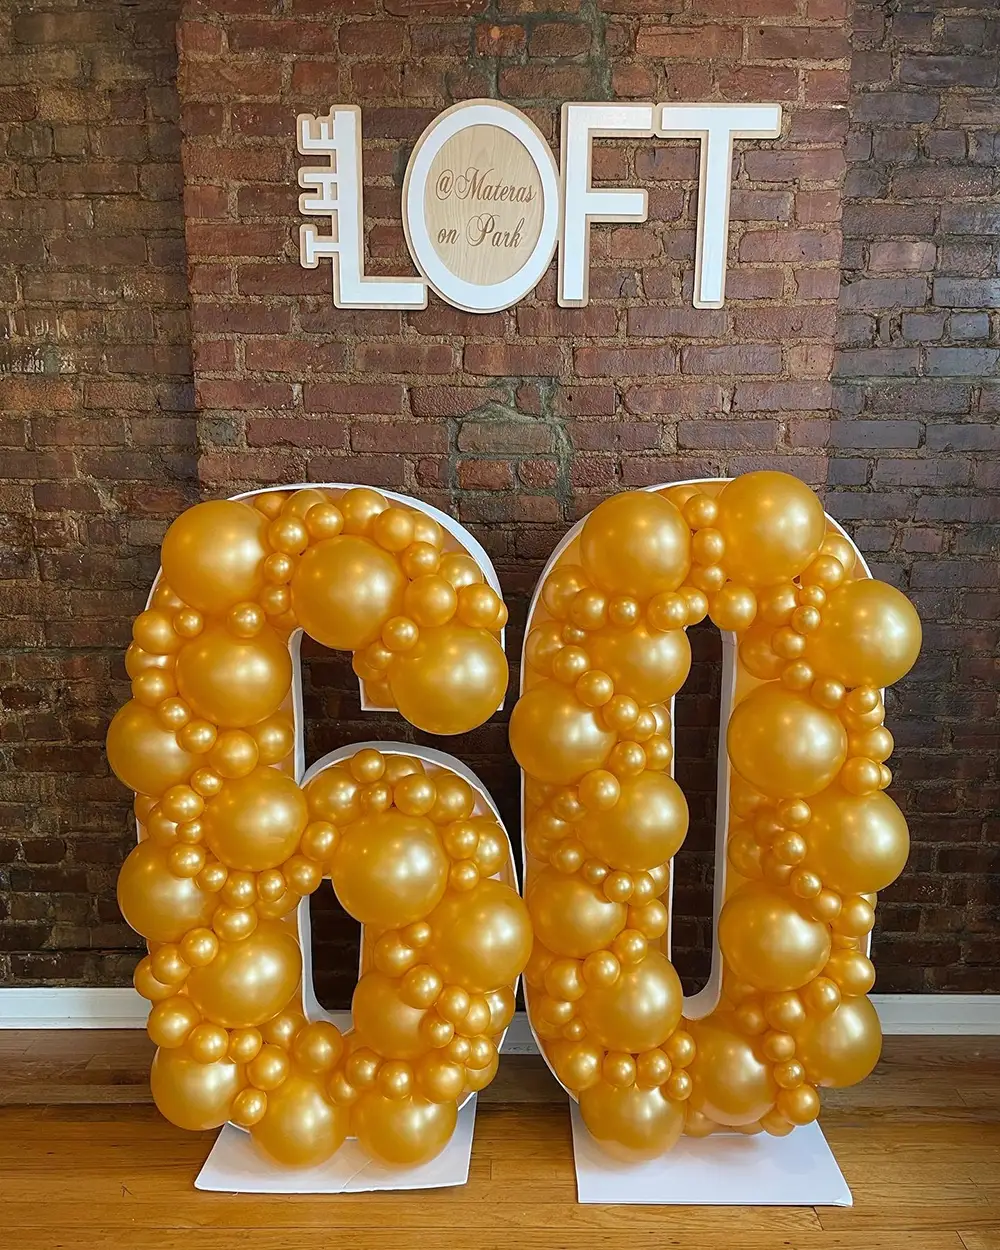 A balloon mosaic built for an event in Woodbridge NJ by Mint Sprig Balloons and Decor